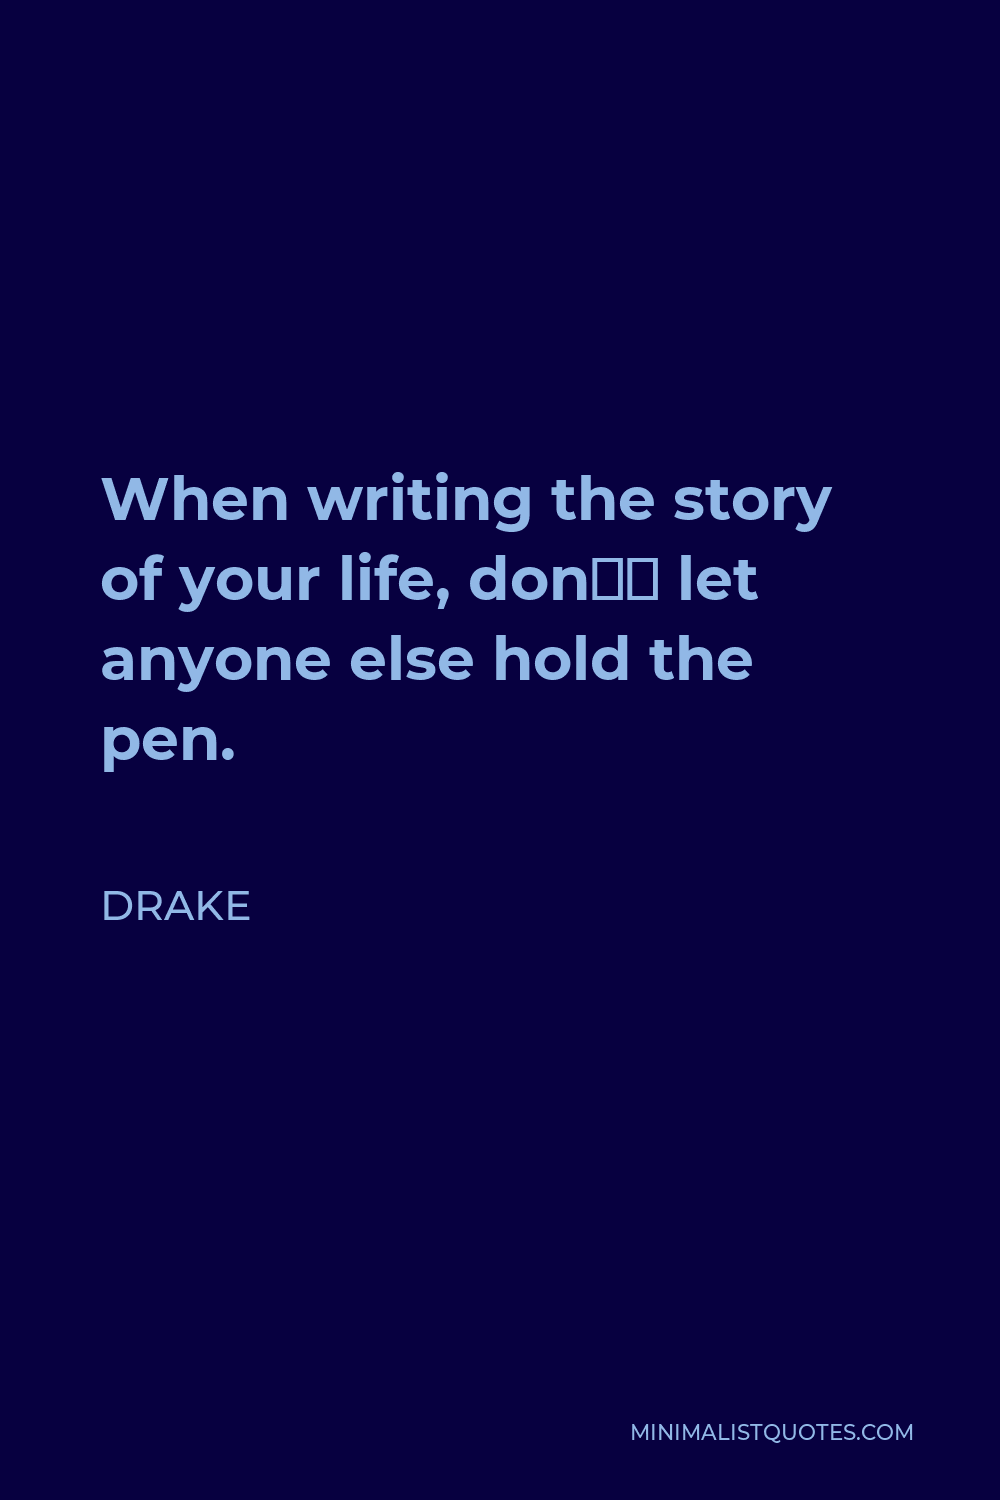 Drake Quote - When writing the story of your life, don’t let anyone else hold the pen.